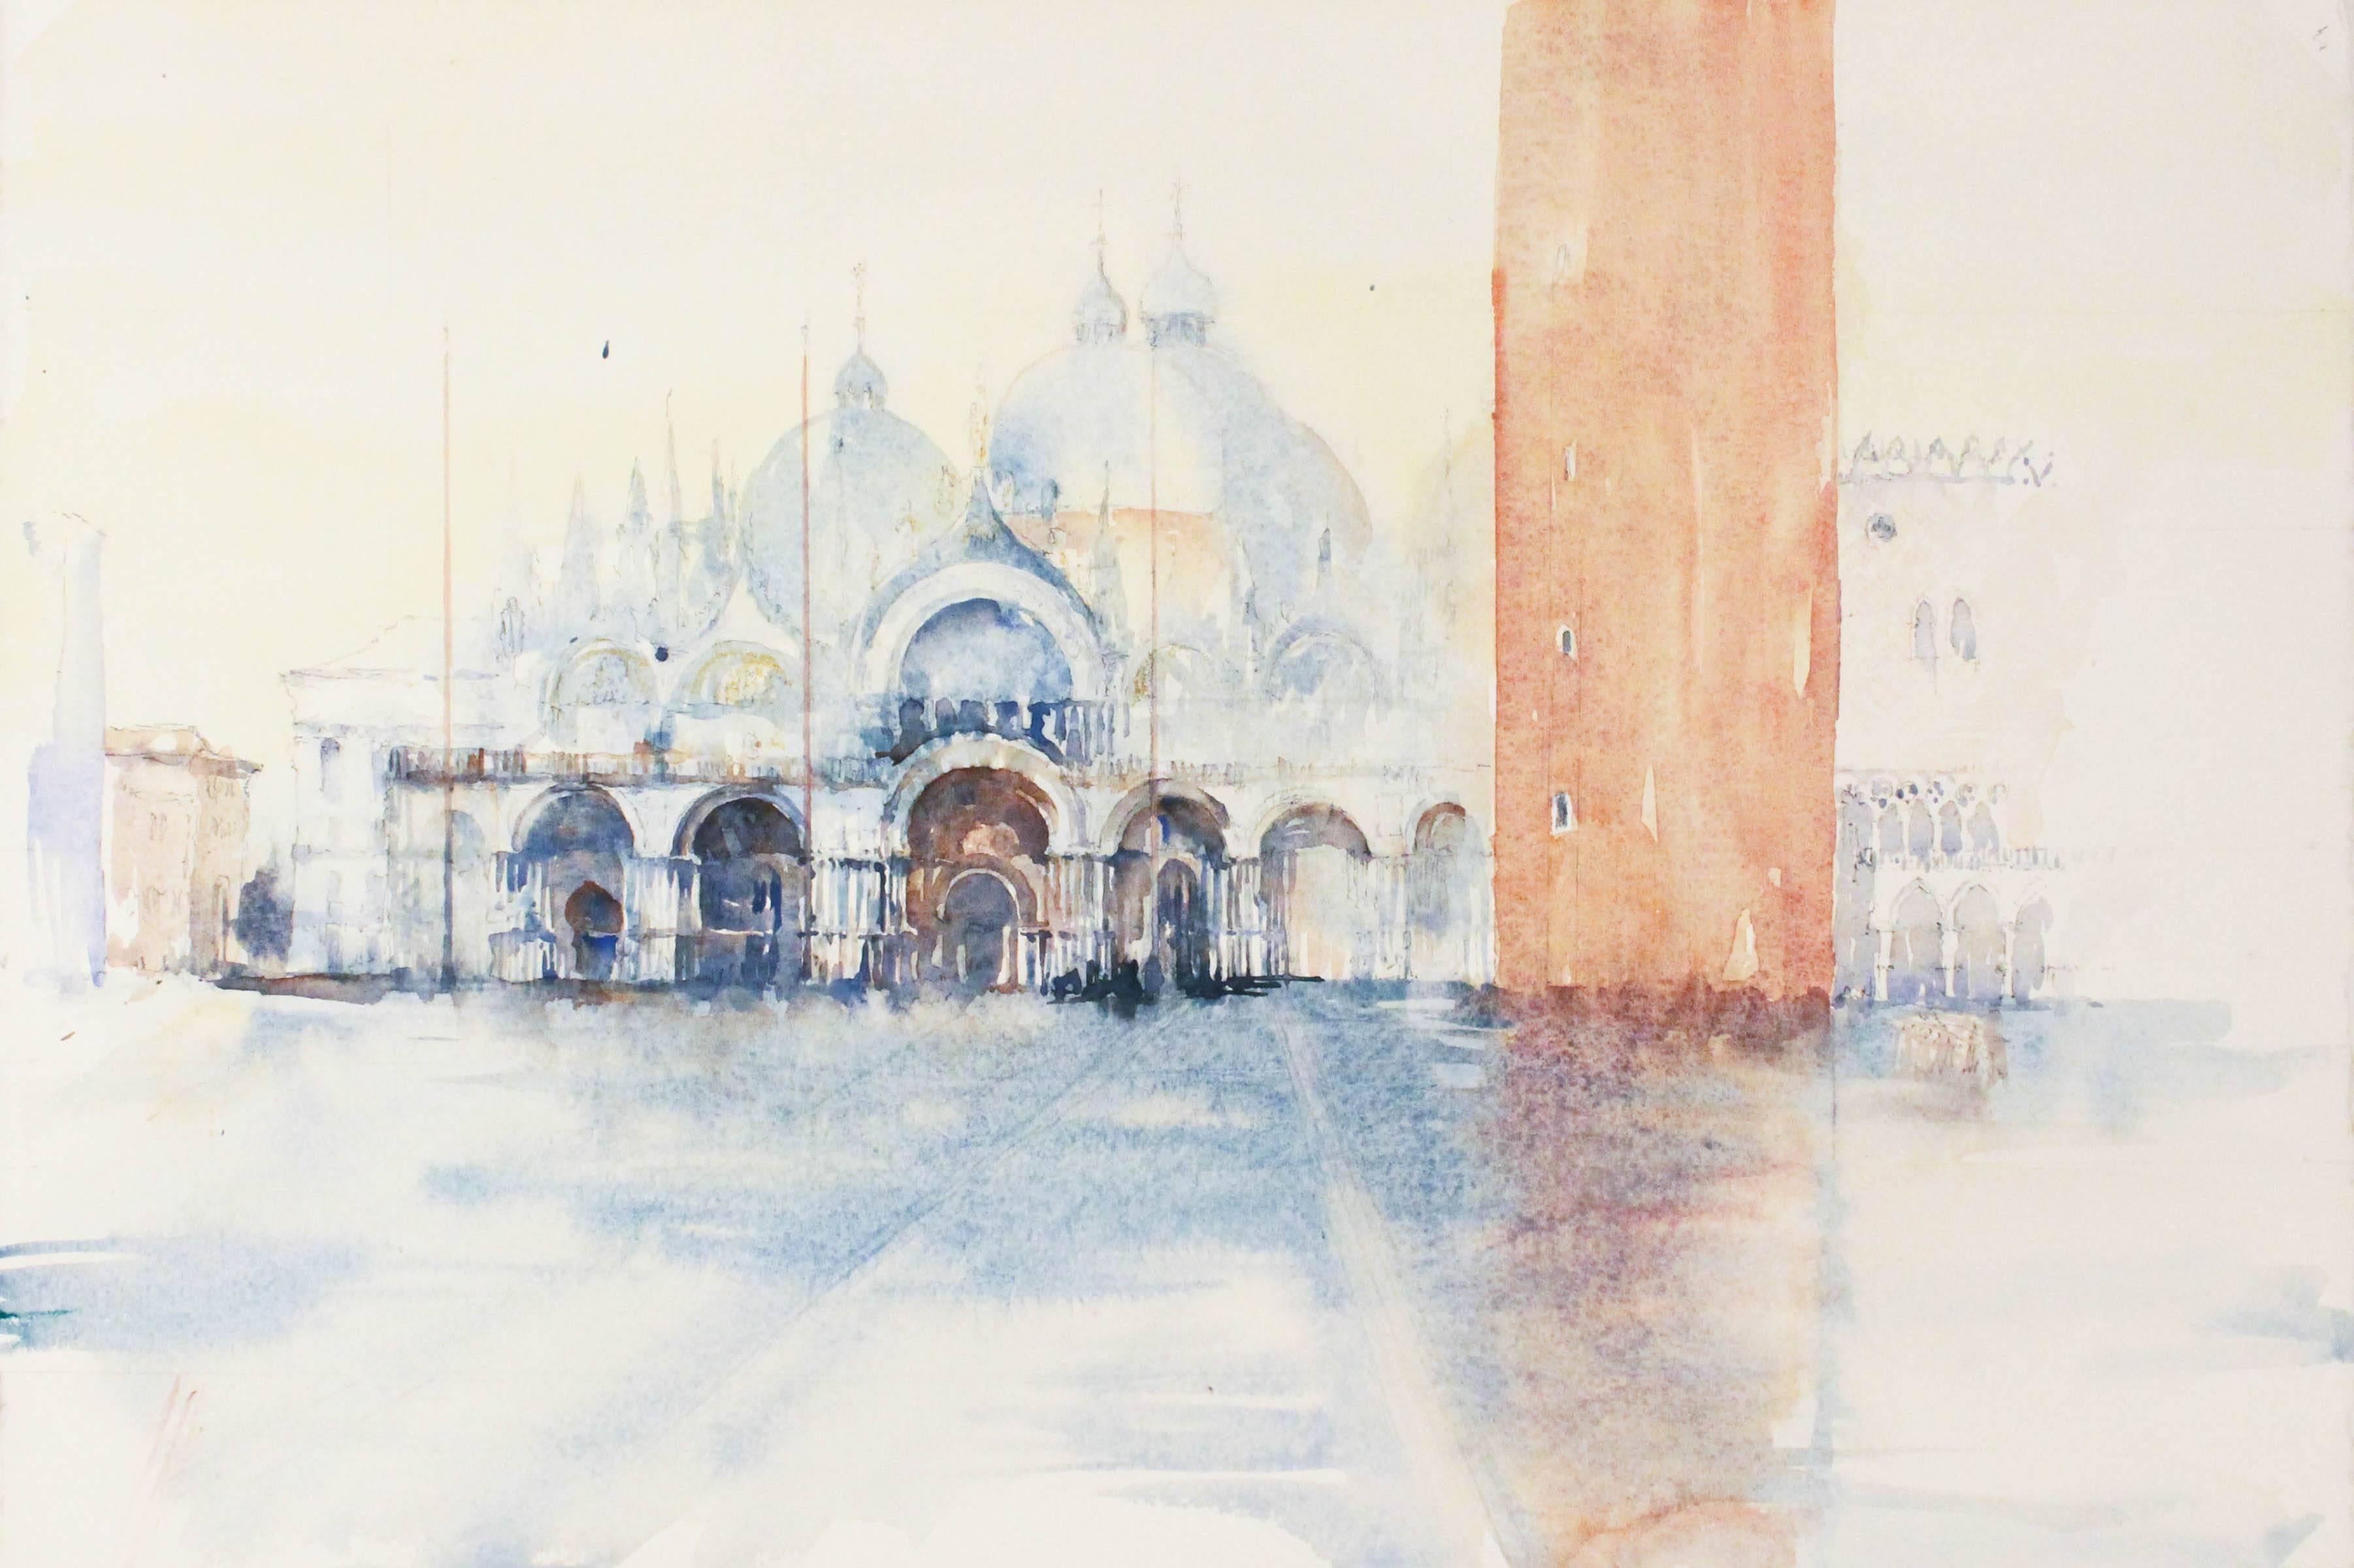 Mclean Jenkins Figurative Art - "San Marco After the Rain" - Venice - Architectural Watercolor Painting - Turner